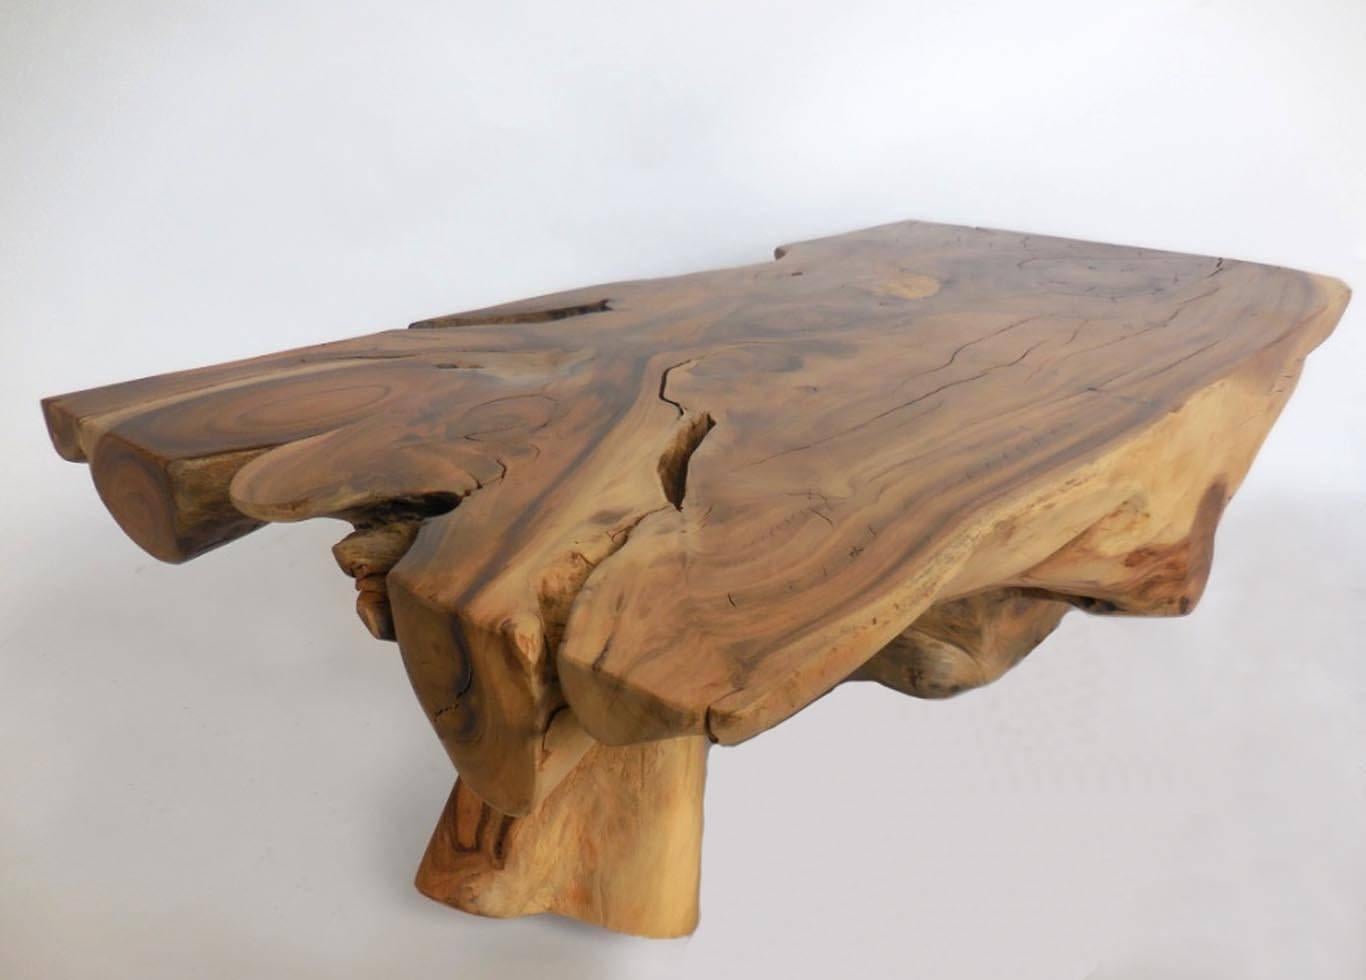 Rectangular shaped free-form root with one leg, making a fabulous primitive modern coffee table. The wood graining is varied and rich, with lots of swirling. Completely stabile and functional.